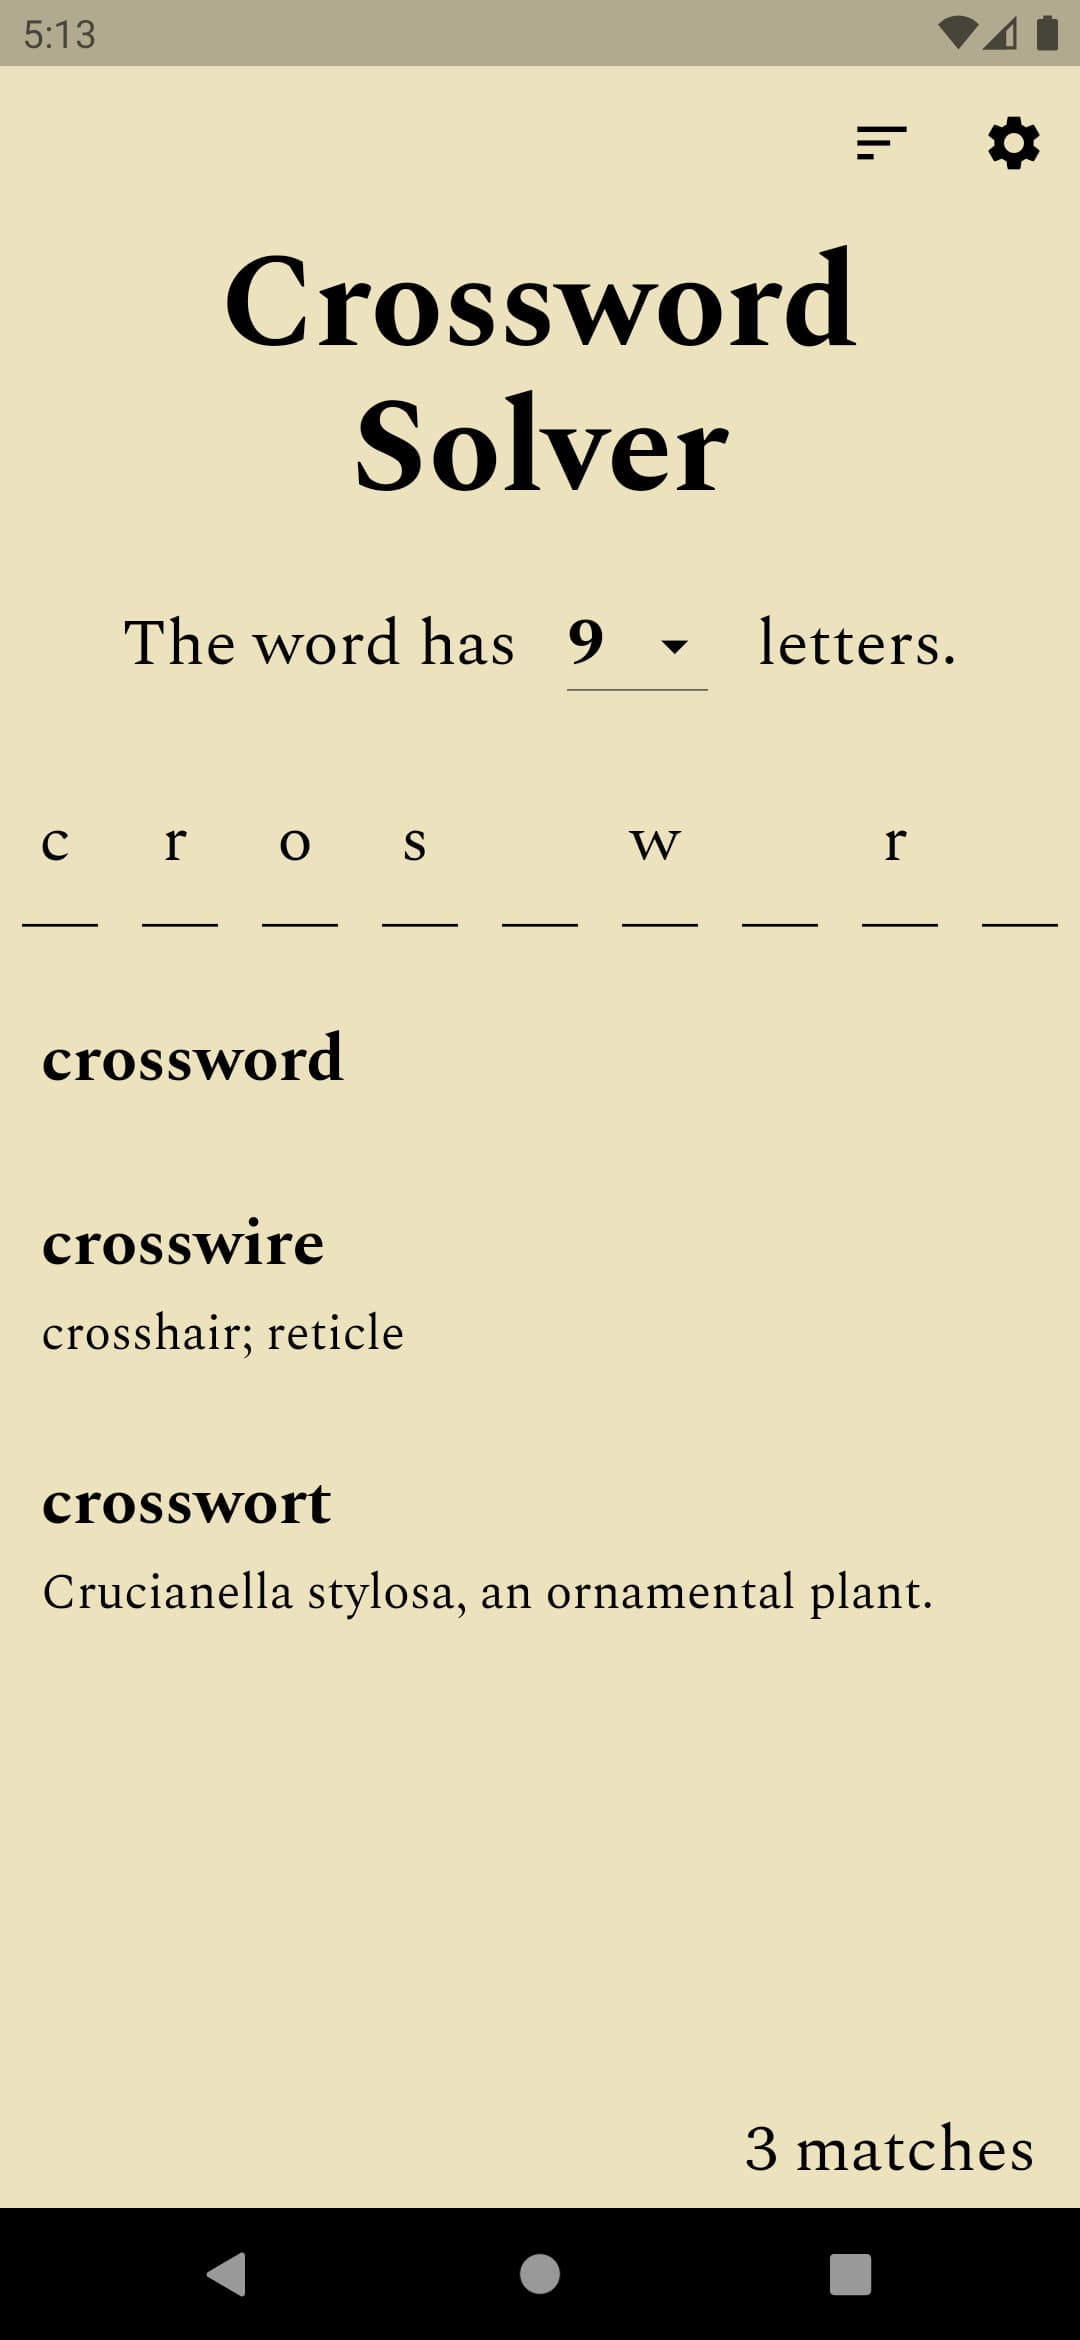 a screenshot of the app interface with words matching the input entered